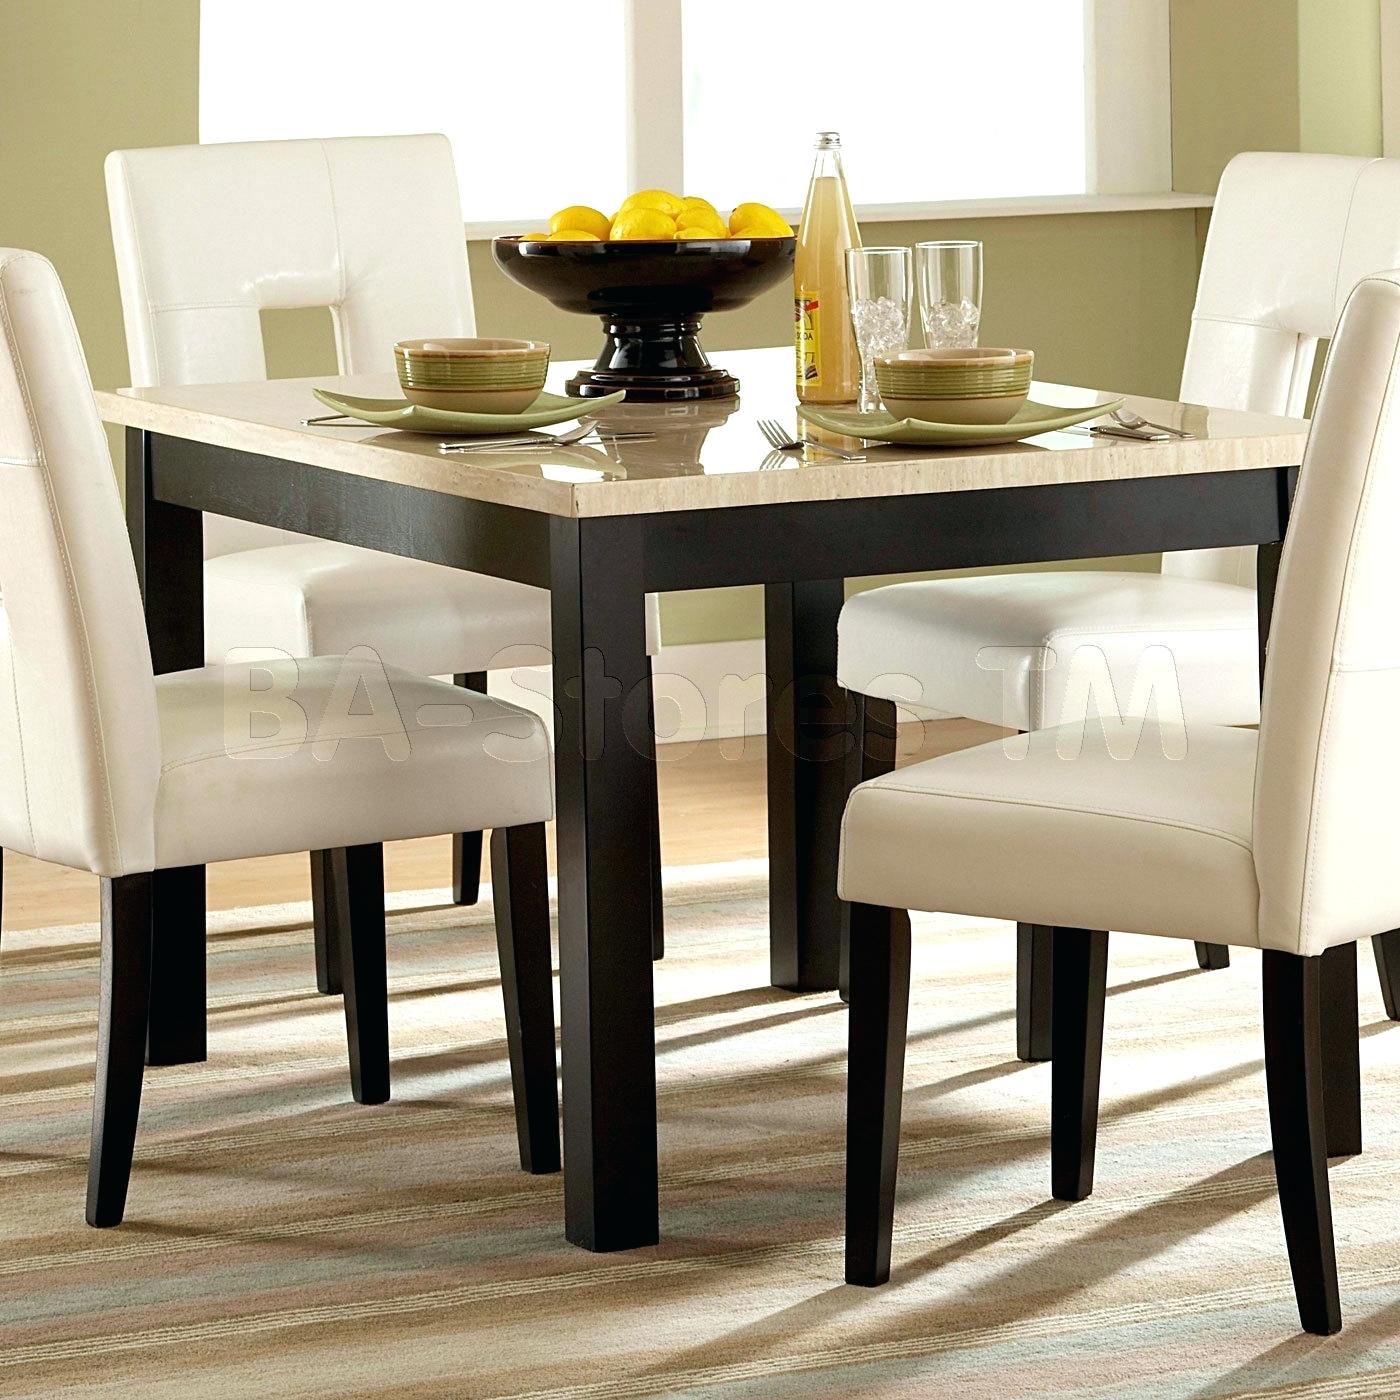 square dining table seats 12 photo - 8